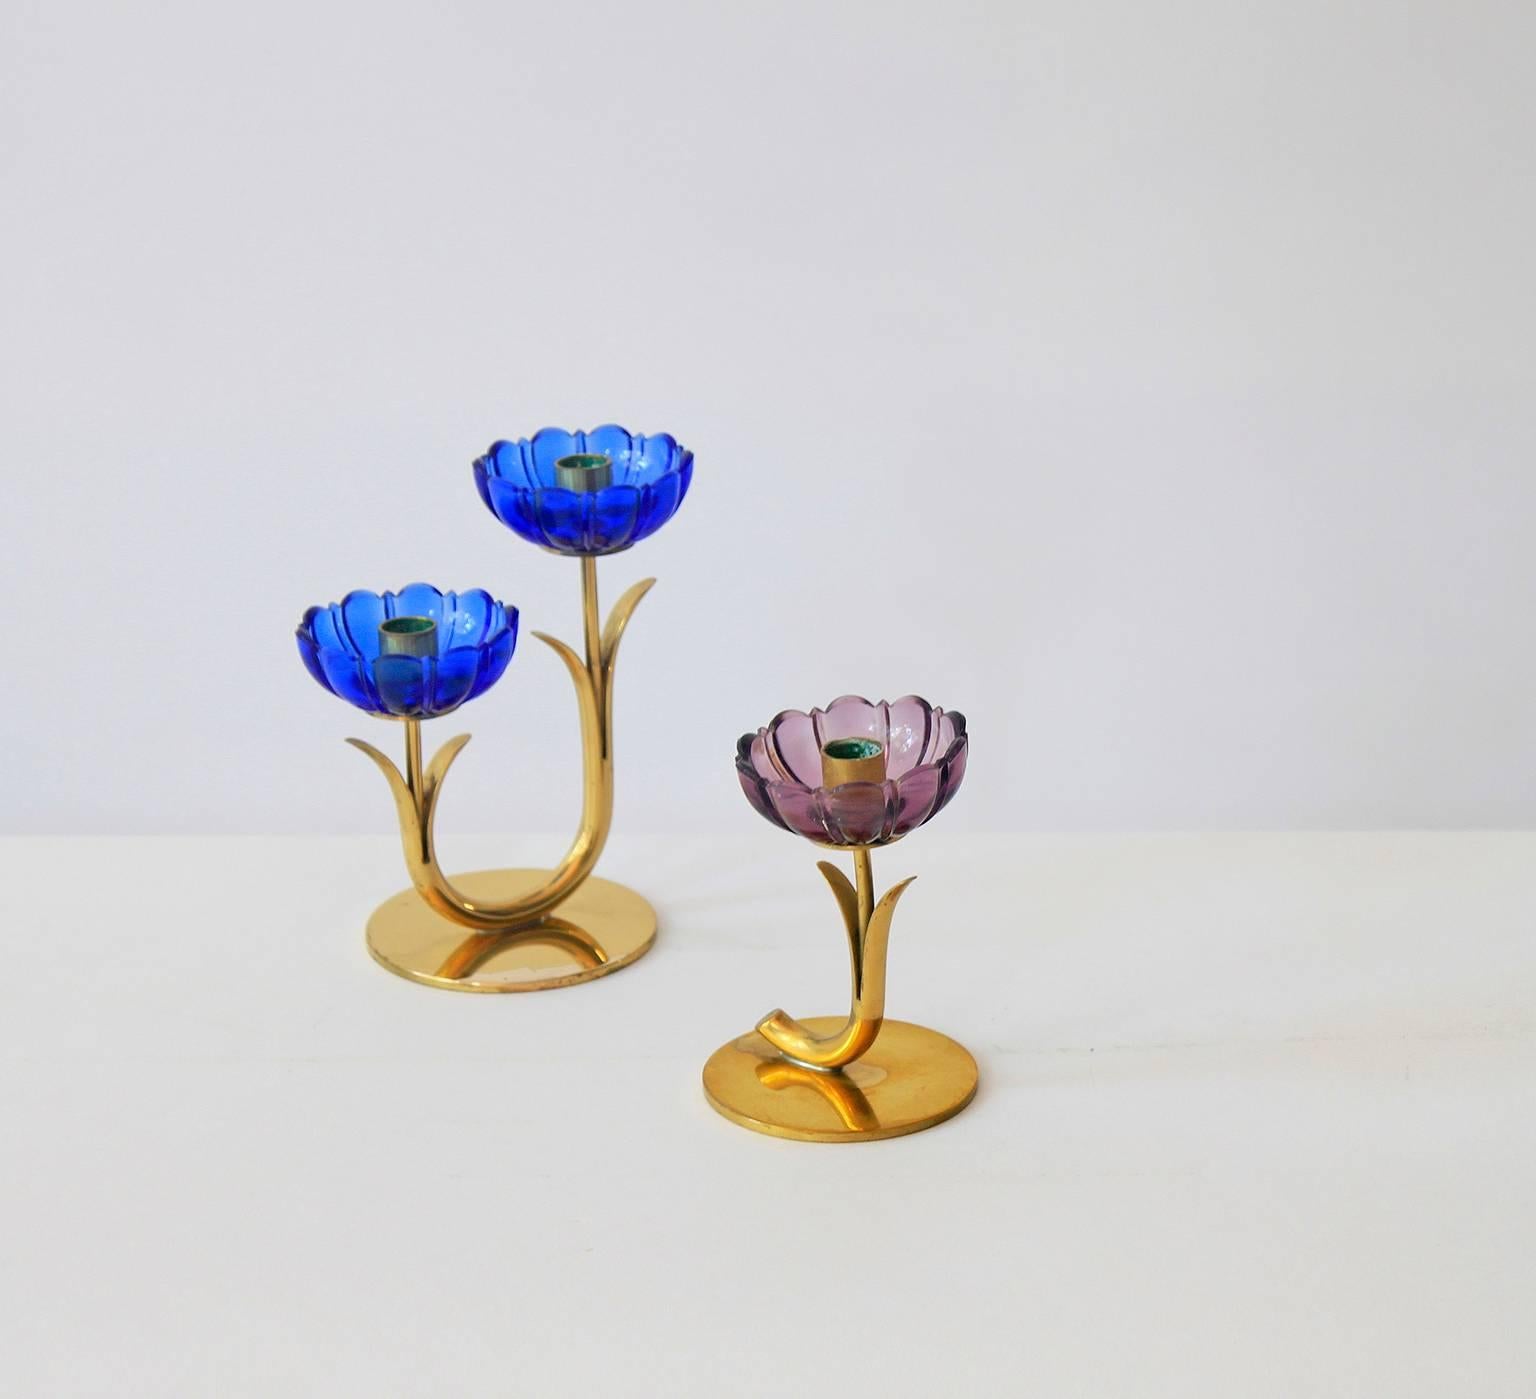 A softly colored flower candle holder by Gunnar Ander for Ystad-Metall.
This example comprises a purple glass flower on a gold-plated brass stem.